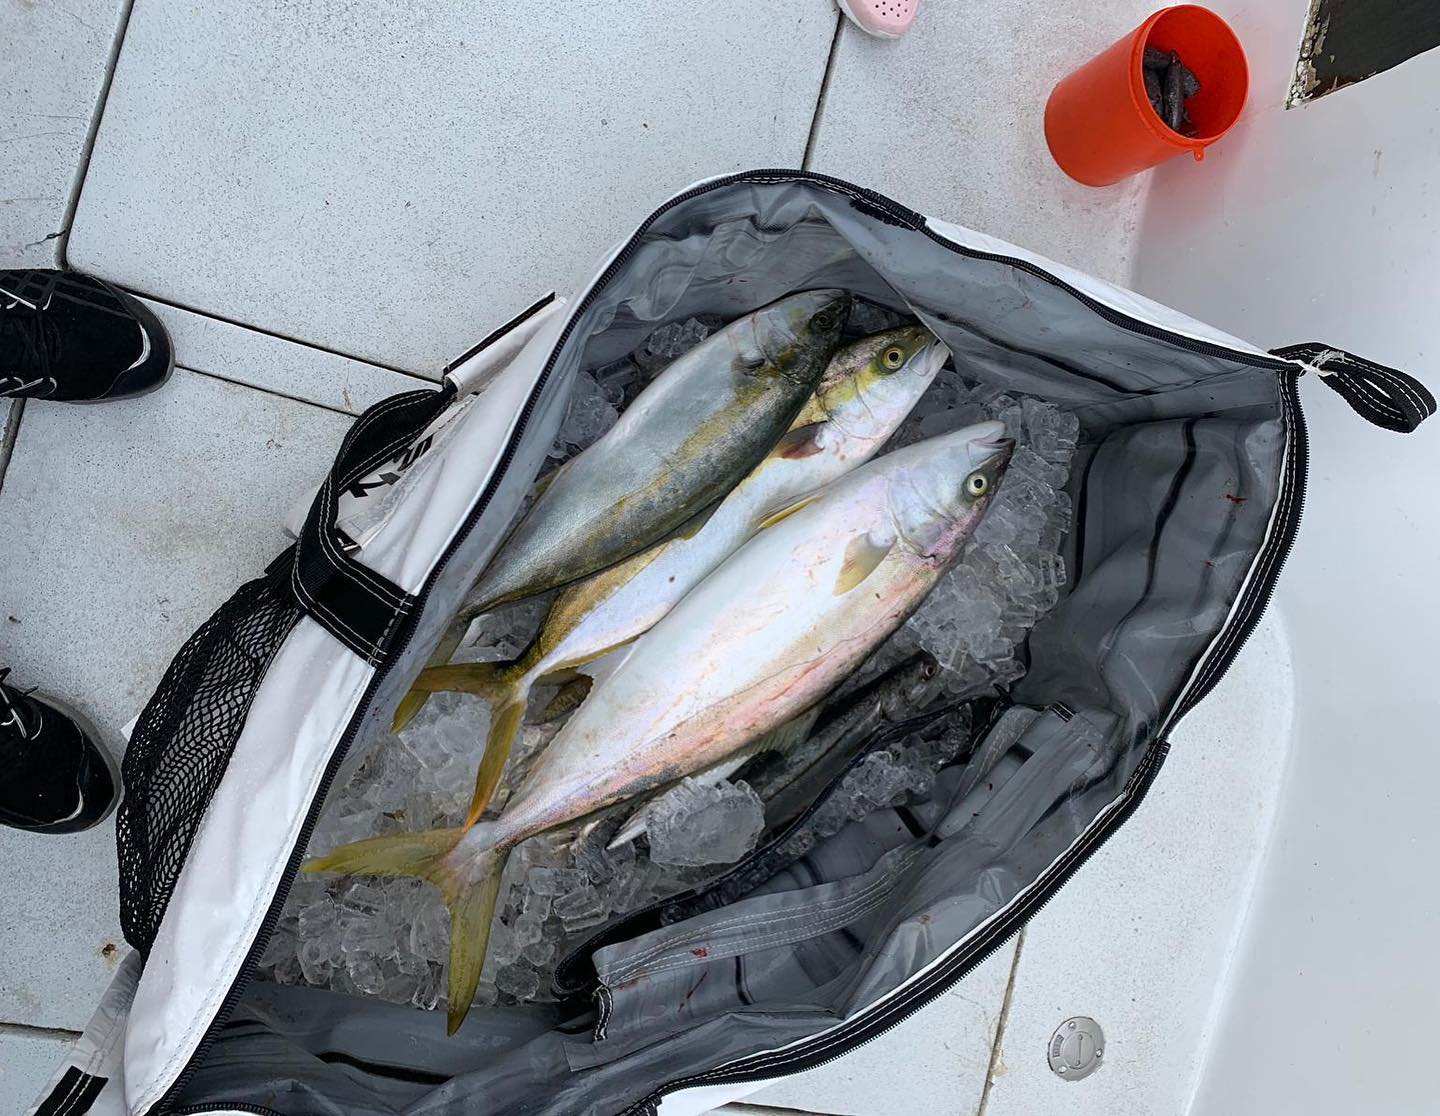 PREORDER ONLY Fathom 4 Insulated Cooler Bag, Salmon 44L x 12W x